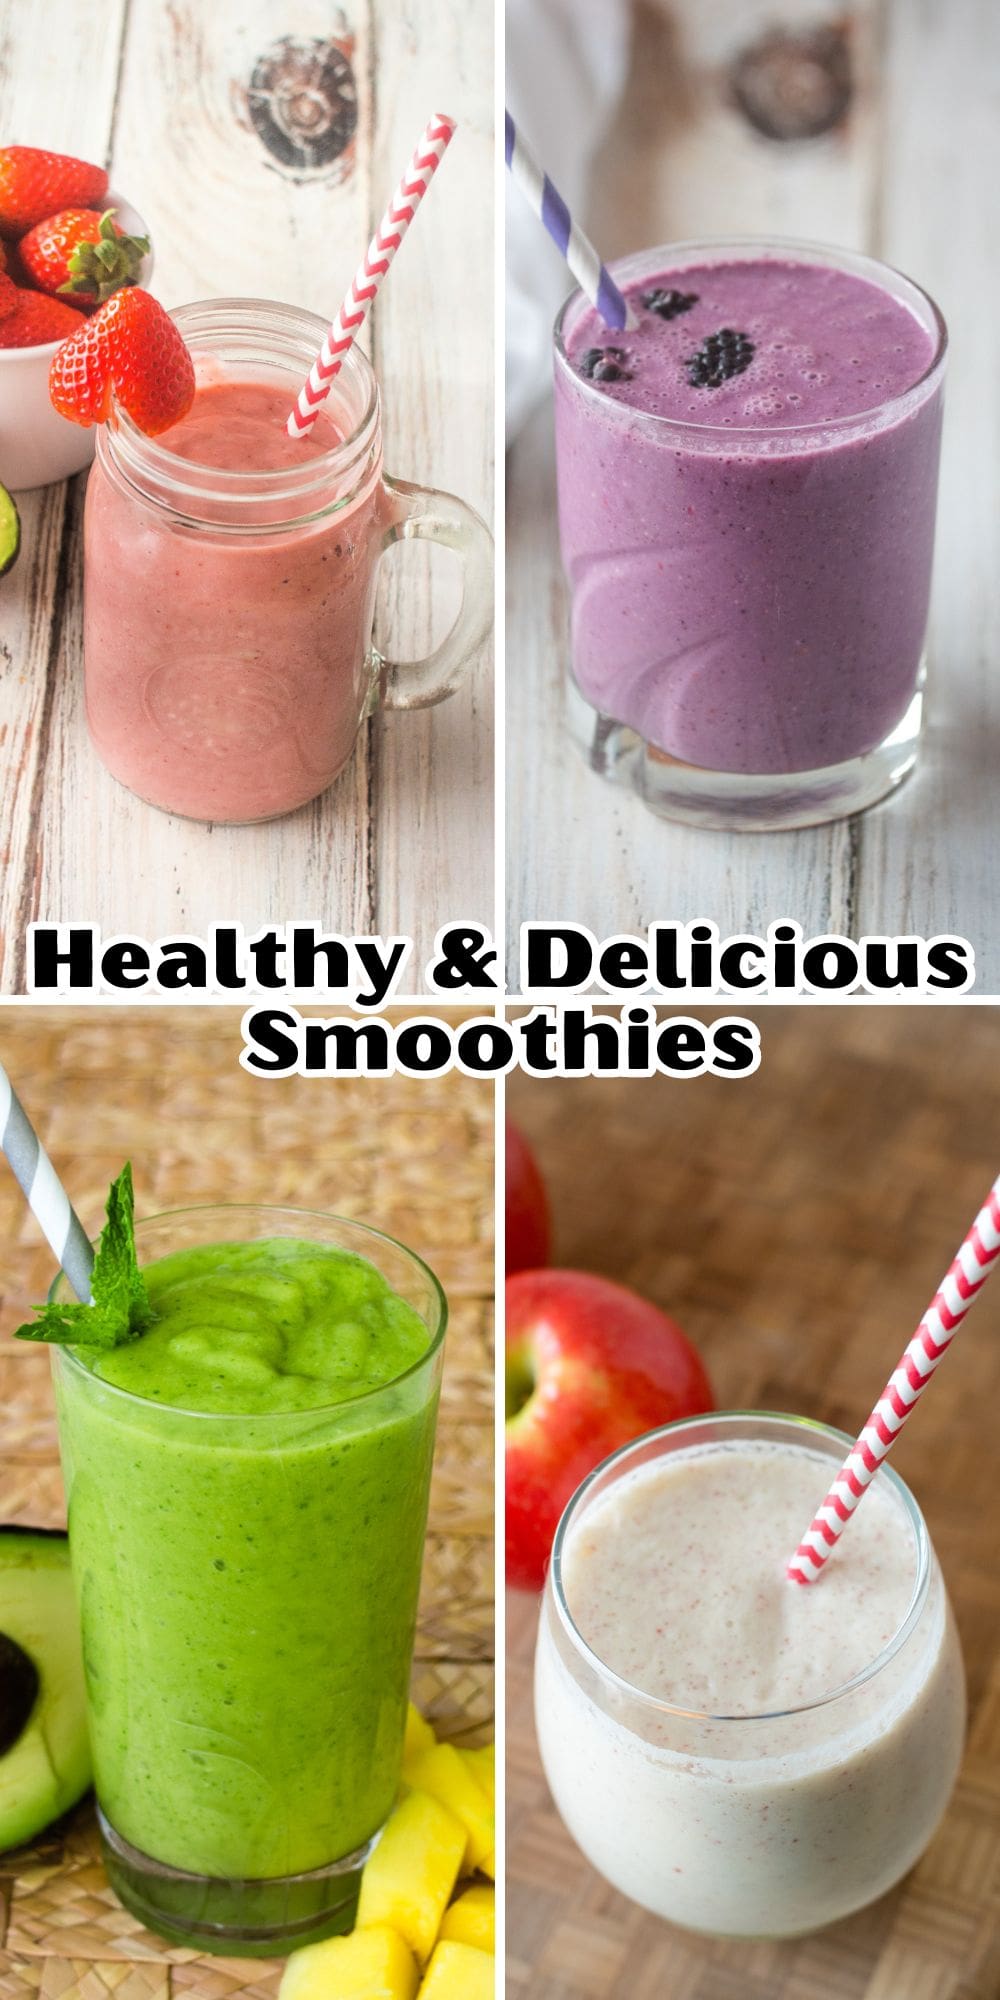 Healthy and delicious smoothies.